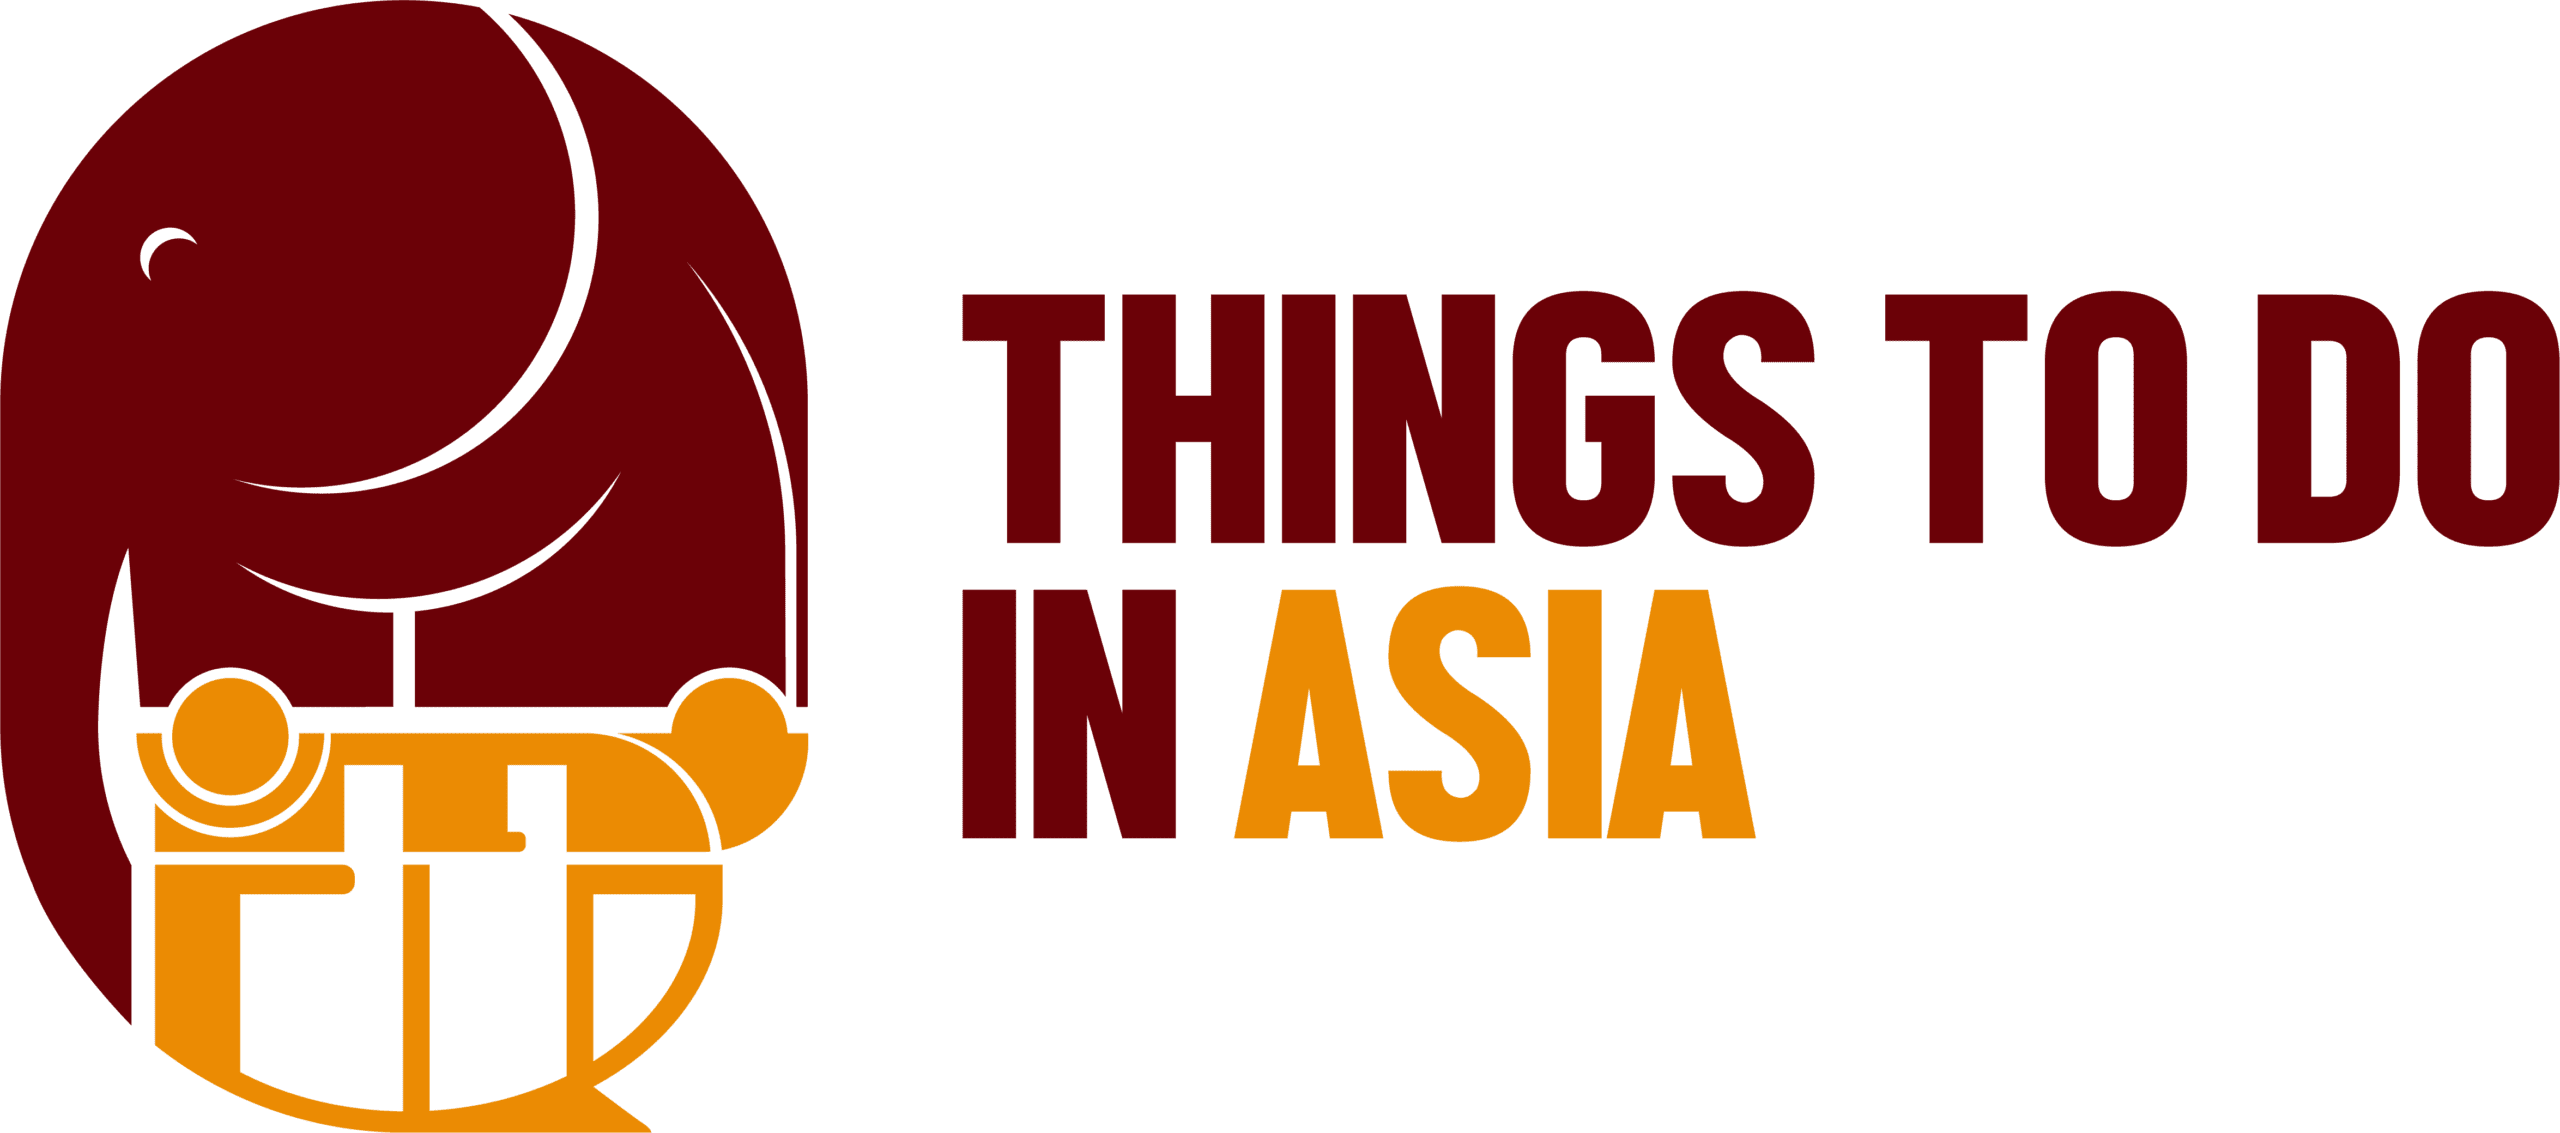 Things to do in Asia